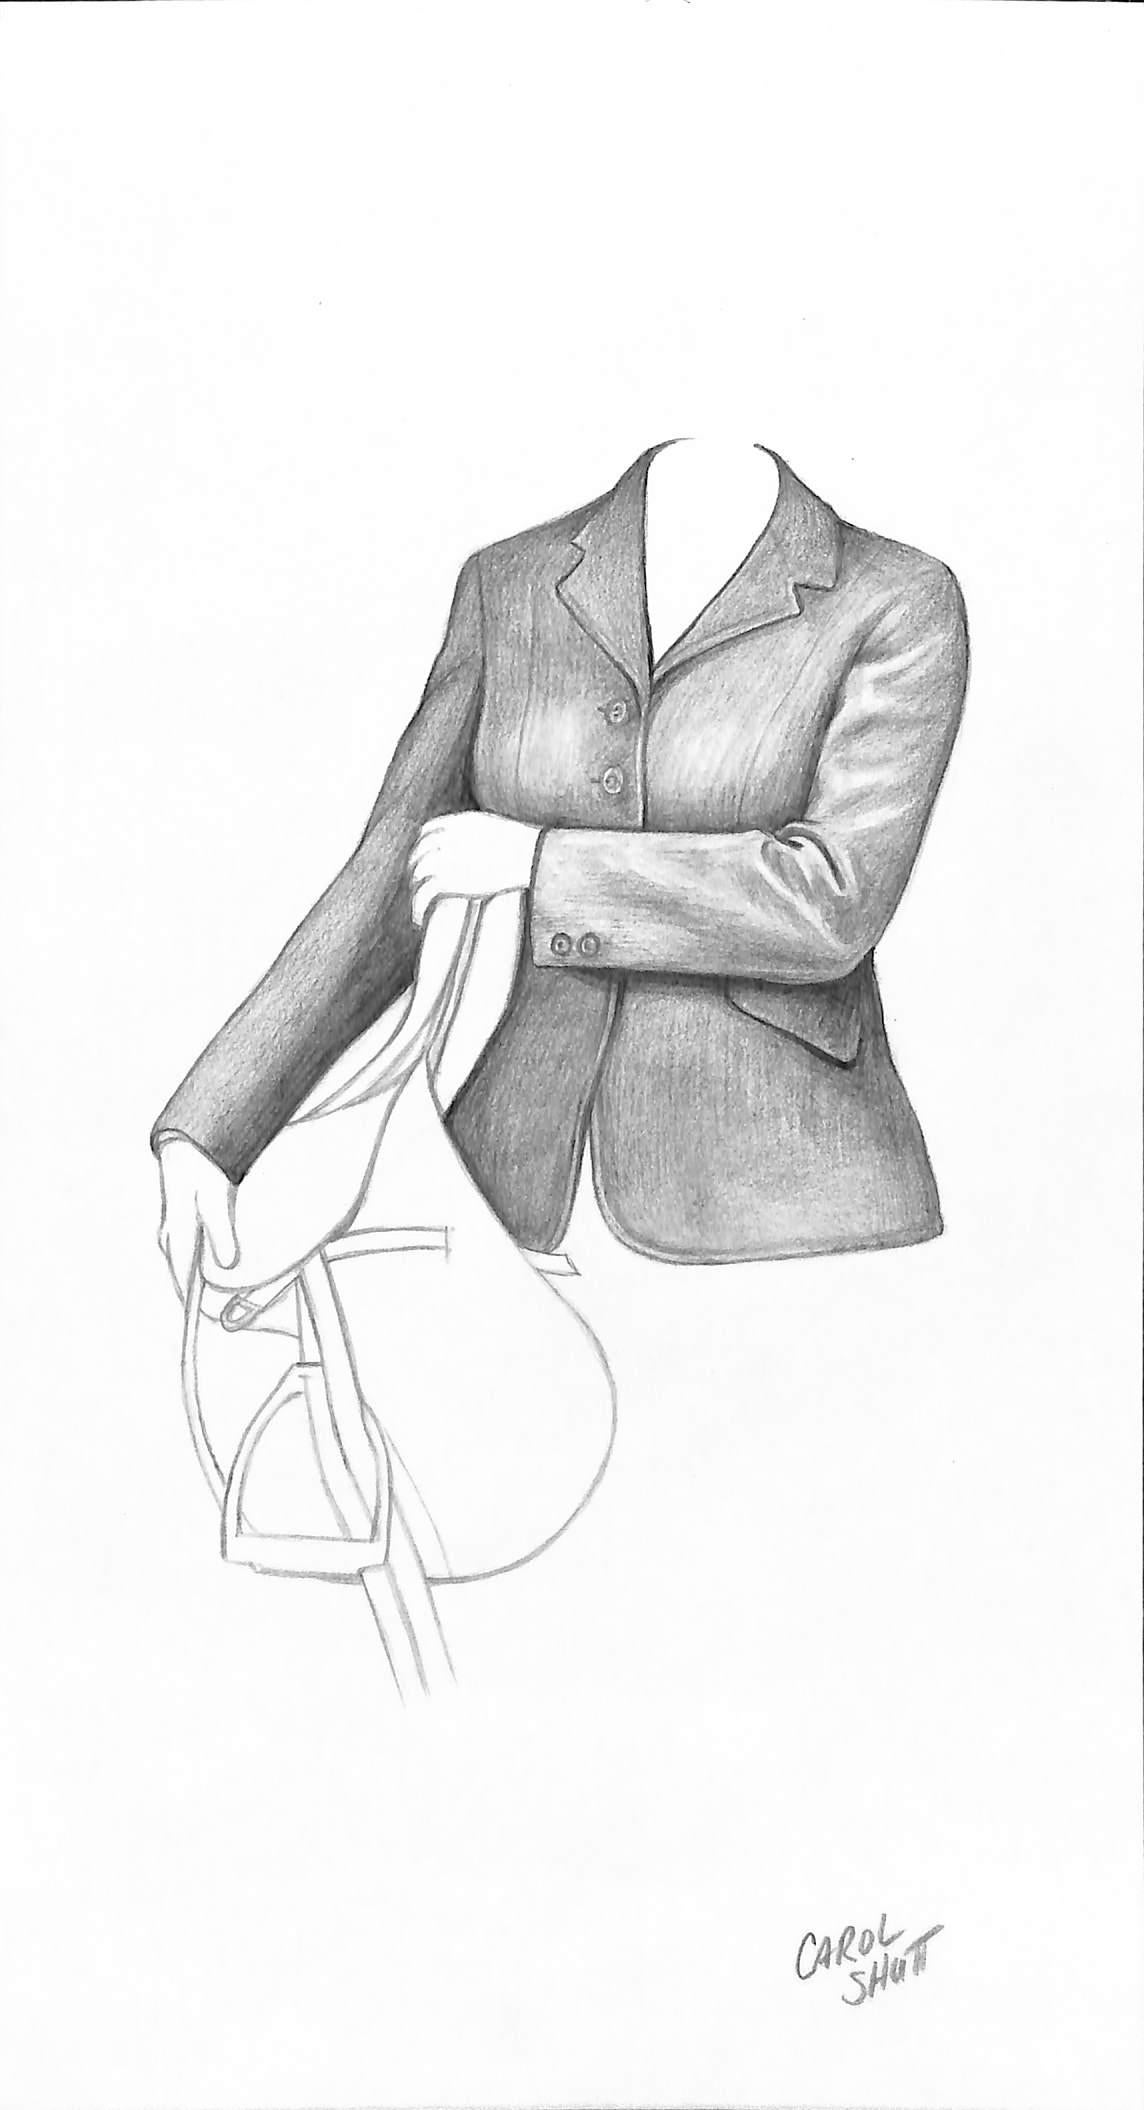 Ladies Hunt Jacket & Saddle Graphite Drawing - Art by Unknown